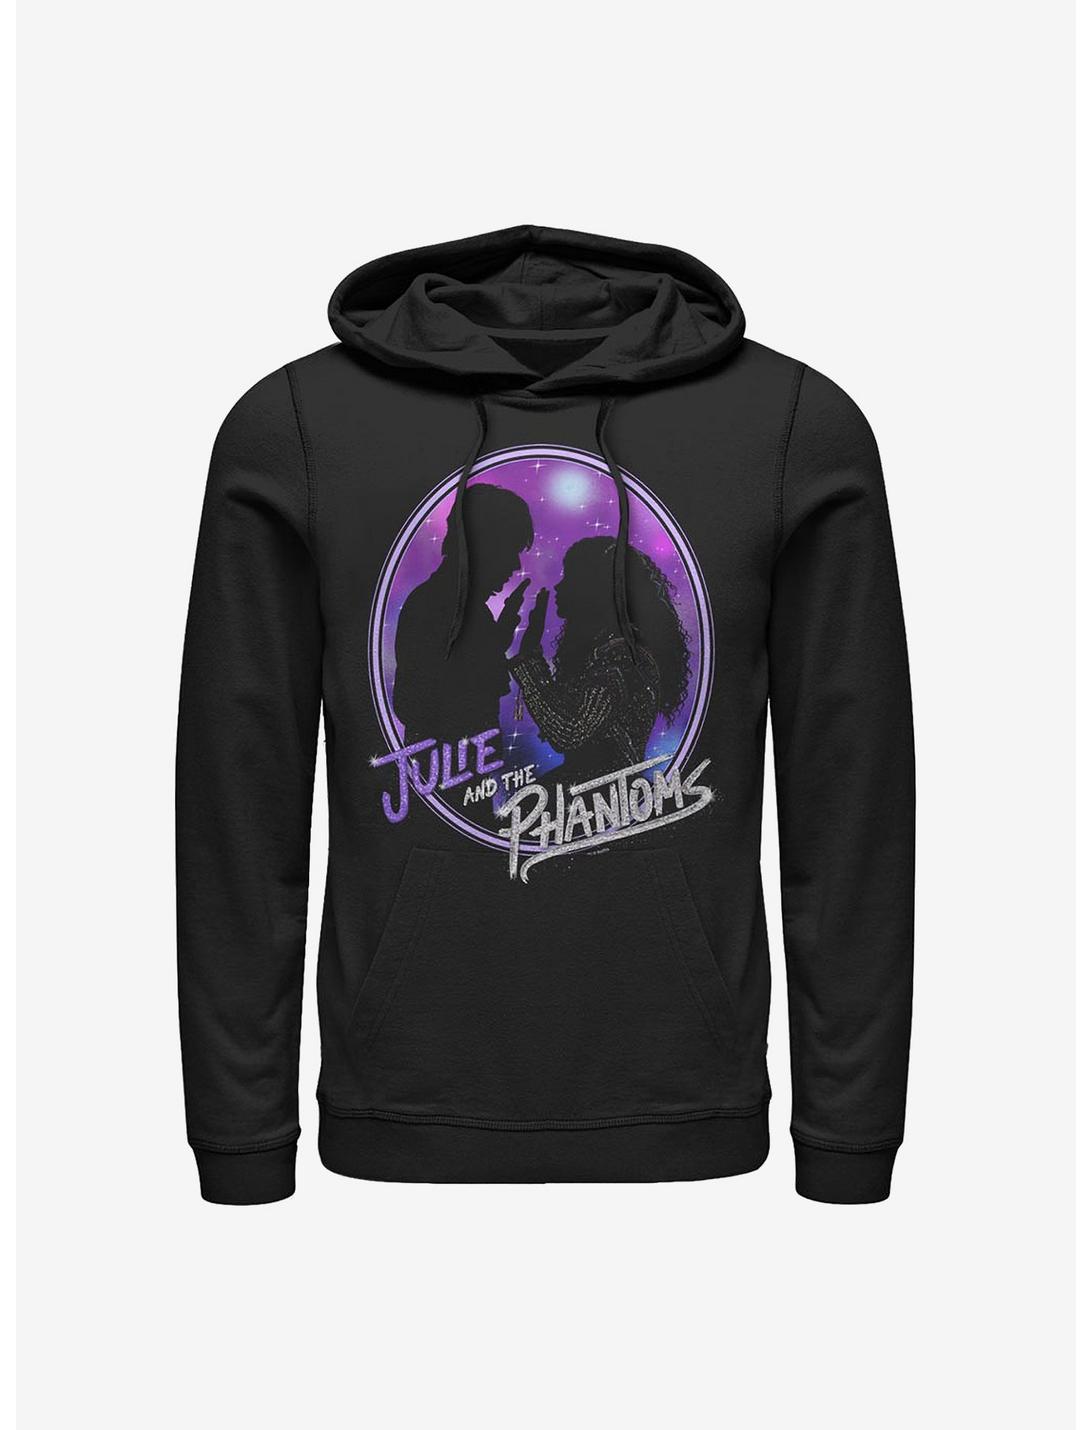 Julie And The Phantoms A Moment Hoodie, BLACK, hi-res